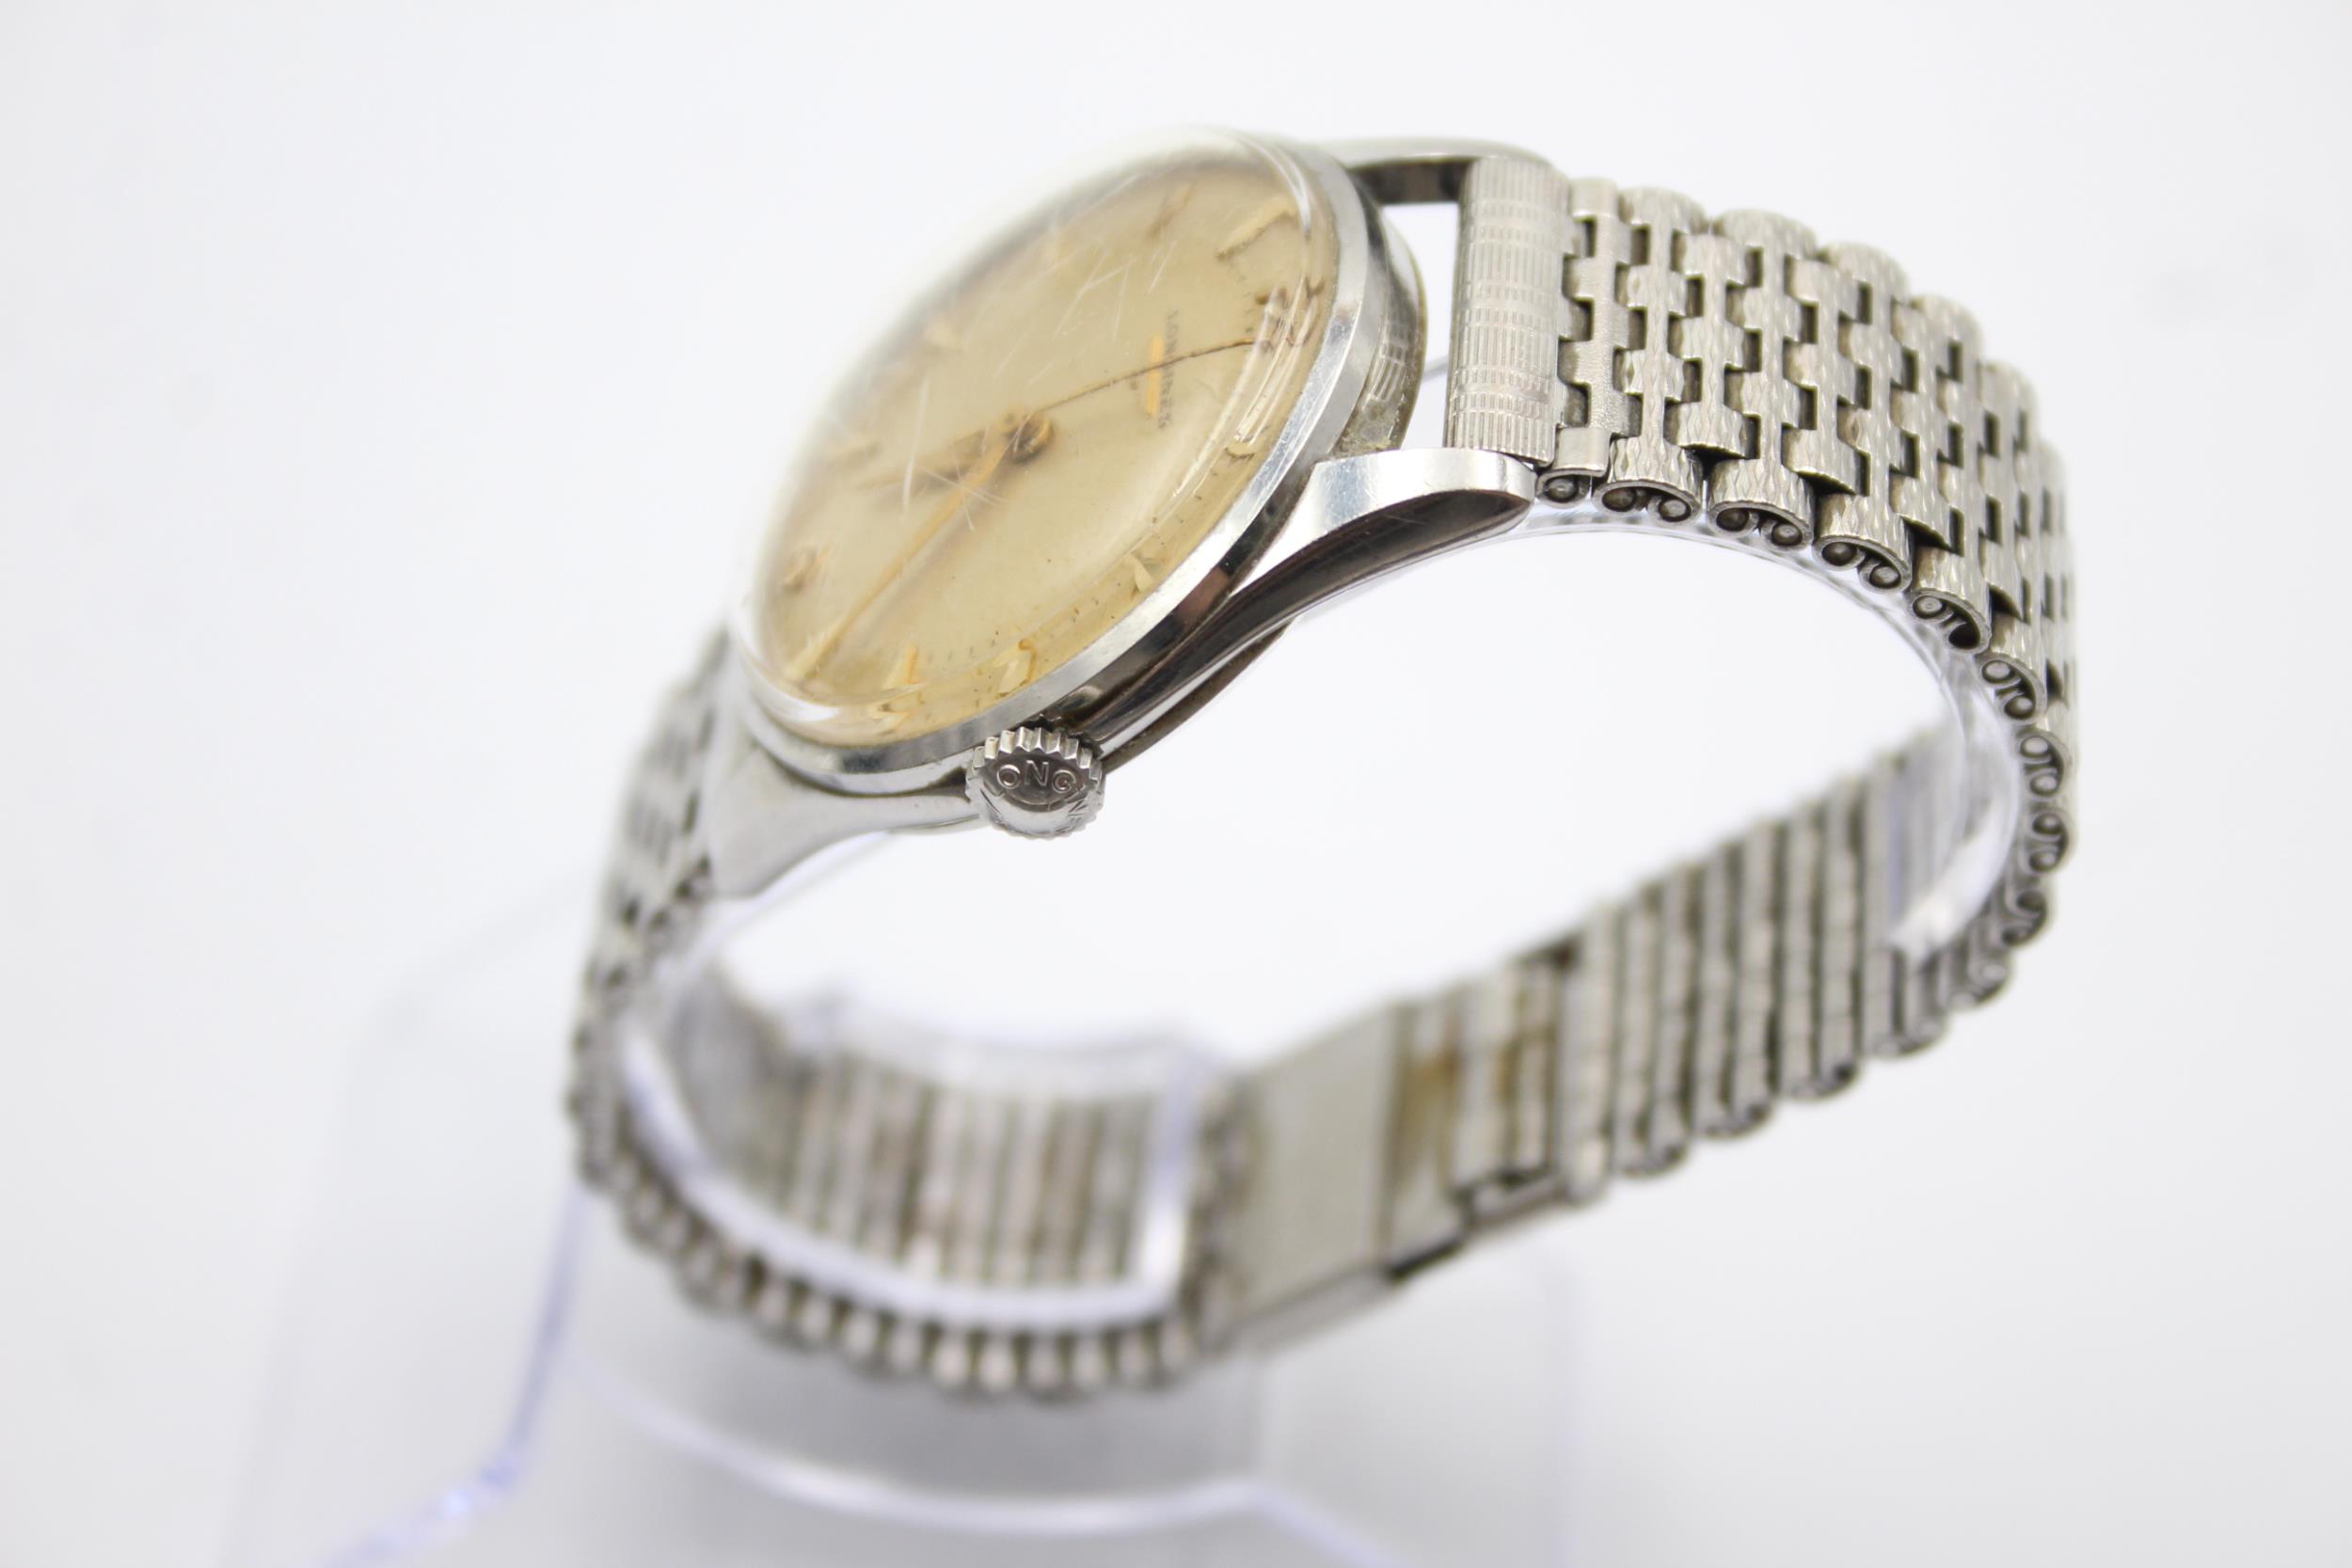 Vintage Gents LONGINES 1950'S Stainless Steel WRISTWATCH Hand-Wind WORKING // Vintage Gents LONGINES - Image 3 of 4